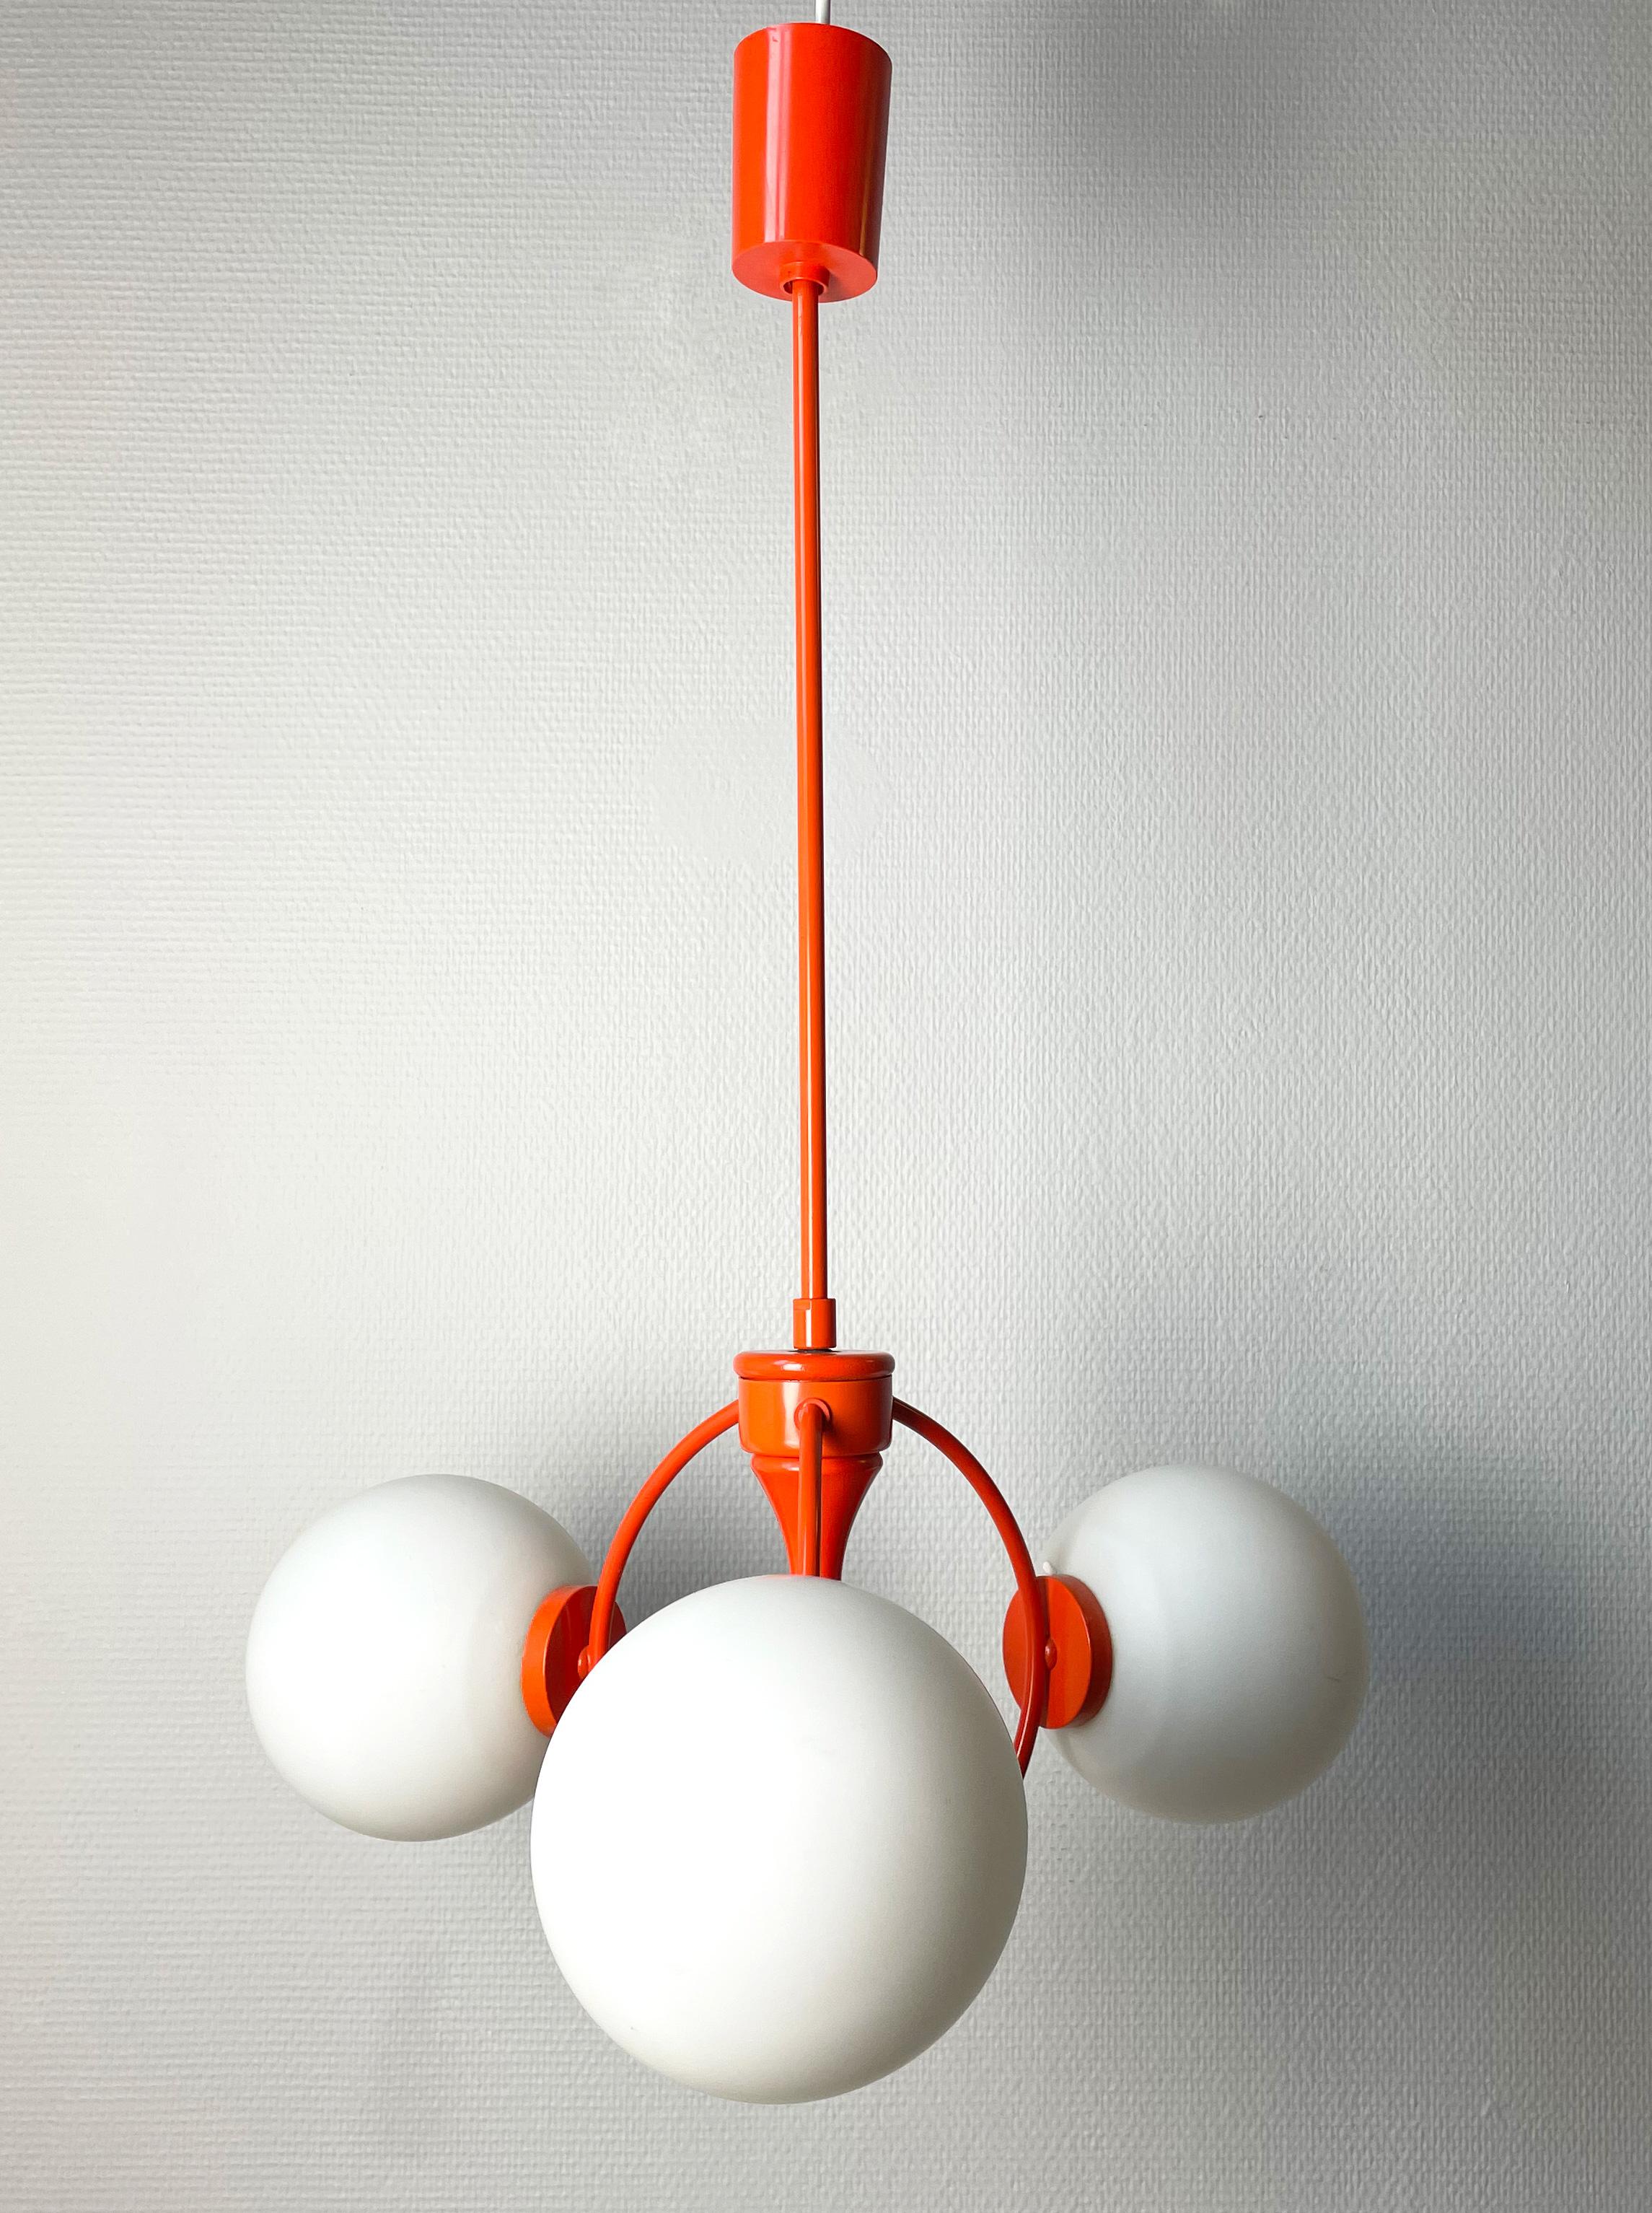 Striking modernist space age Kaiser pendant with three crisp white opaline glass spheres of light. Eyecatching orange molecular metal and wood mount with canopy. Manufactured by Kaiser Lighting in Germany in the 1960s. Three sockets for E14 40W